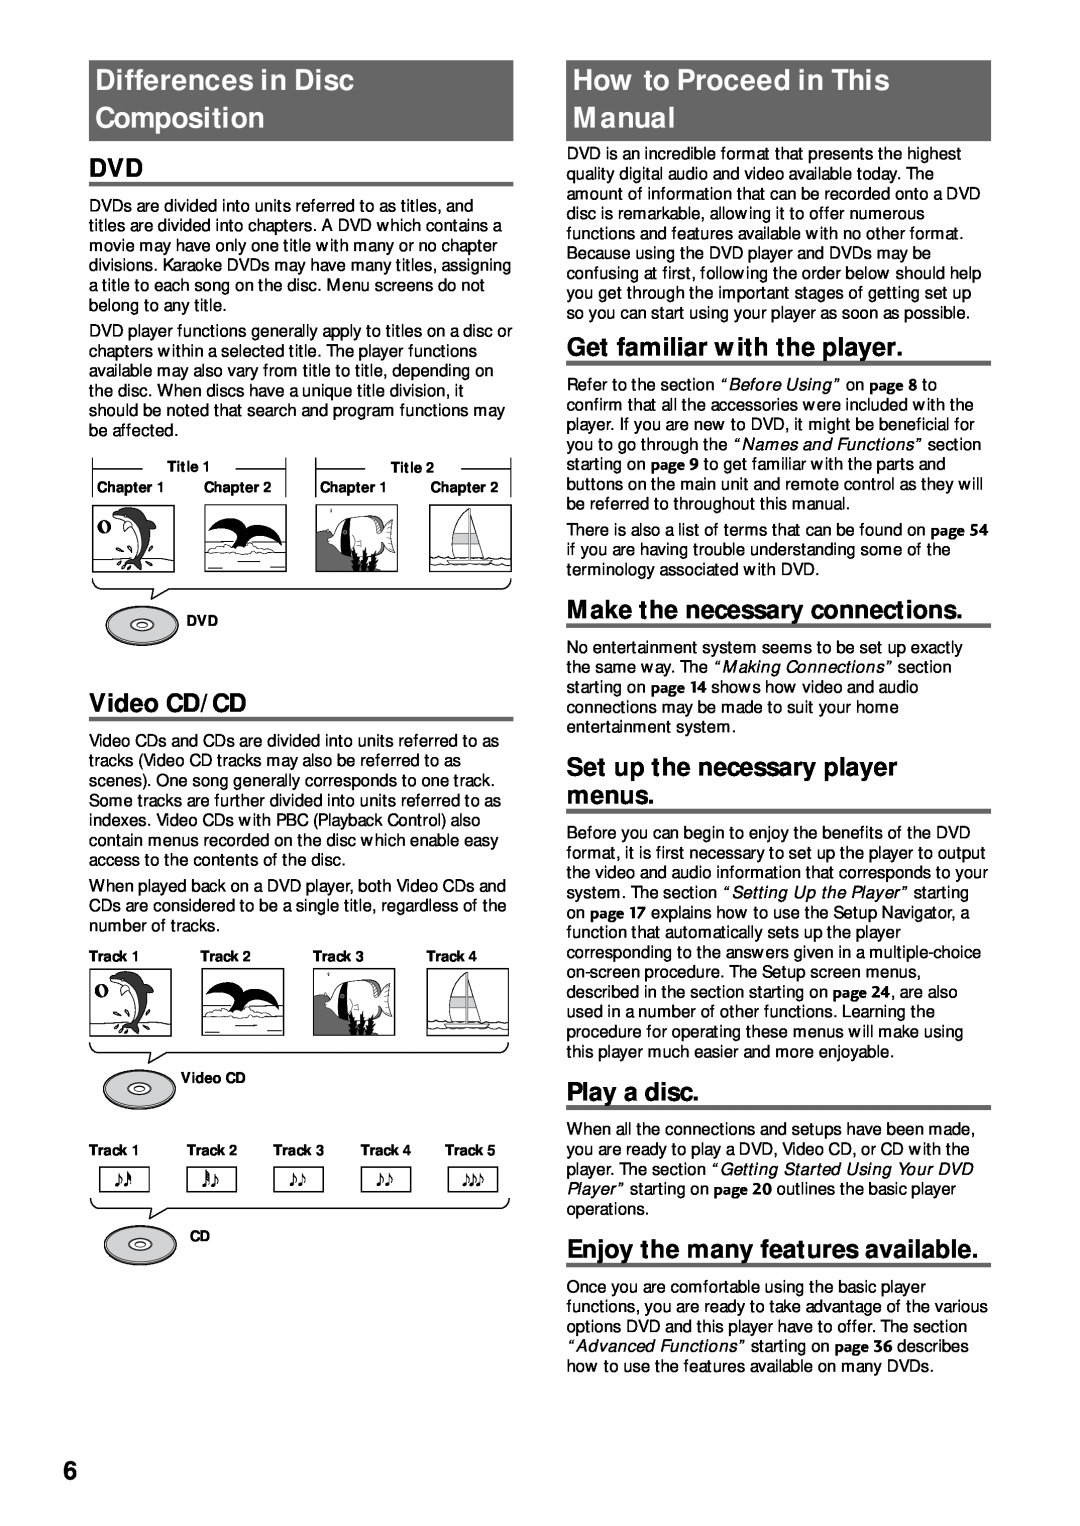 Pioneer DV-333 Differences in Disc Composition, How to Proceed in This Manual, Get familiar with the player, Video CD/CD 